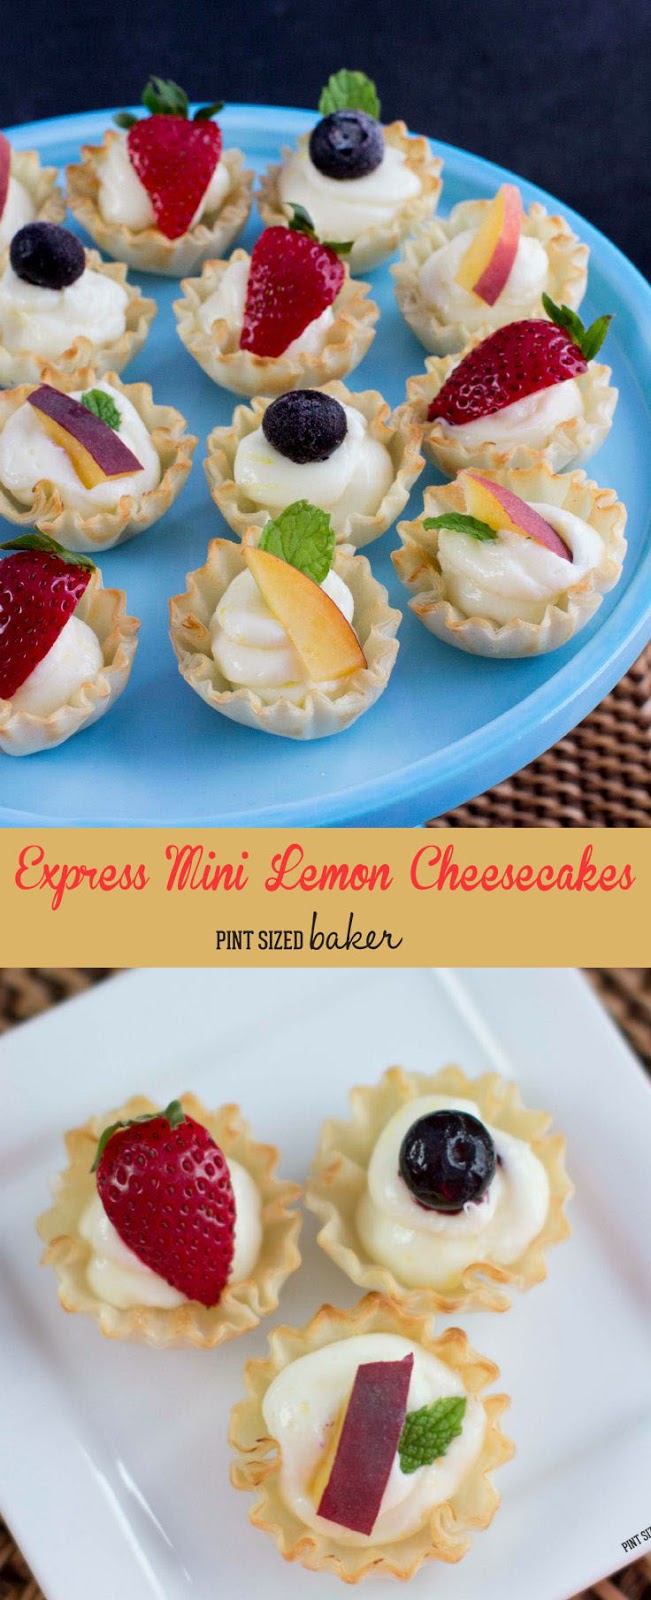 Nothing beats quick and easy and these express mini lemon cheesecakes are ready in no time. 5 minutes and 5 ingredients is all you need for dessert tonight!